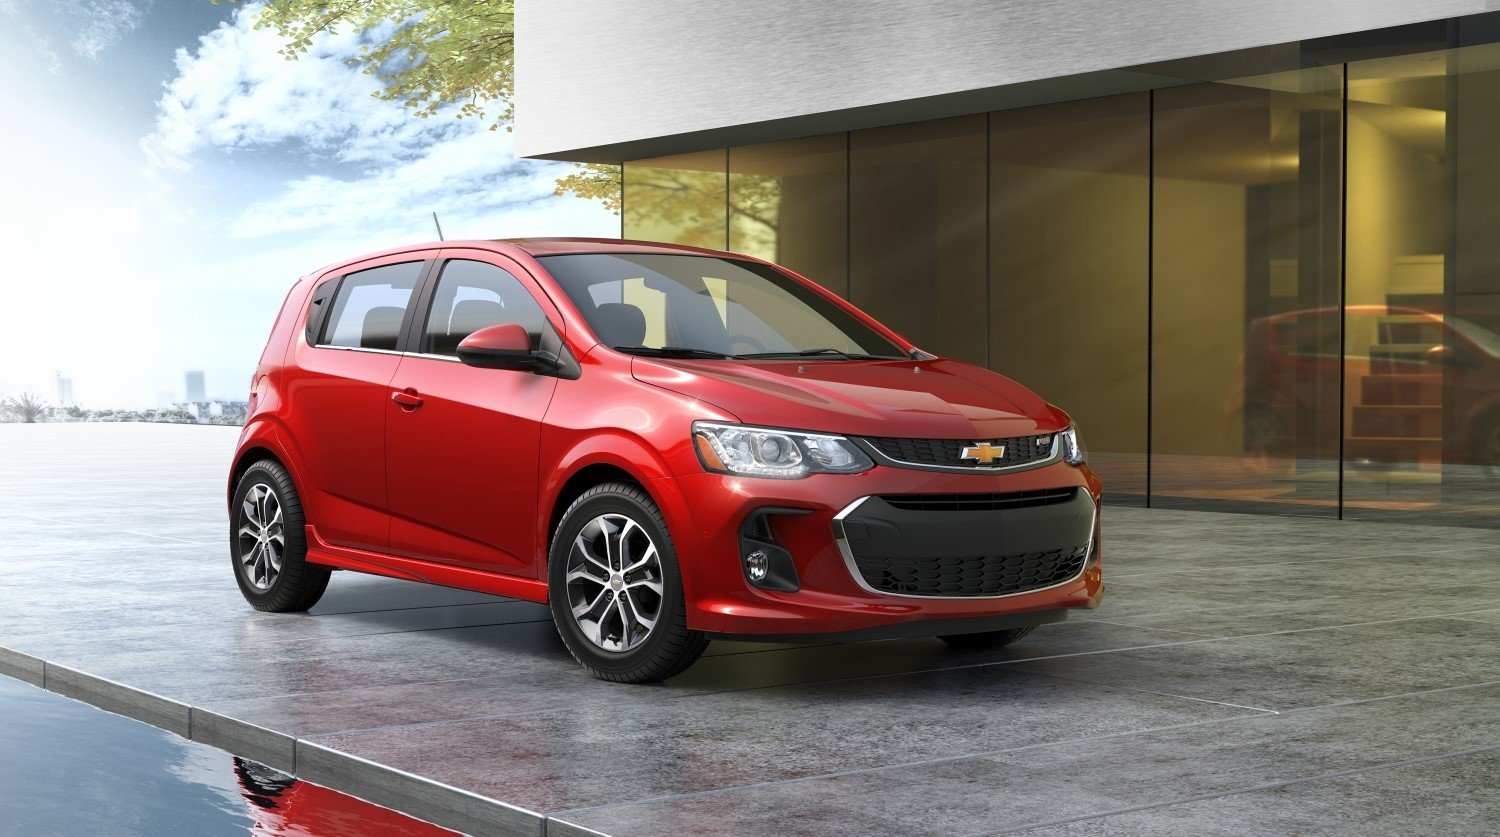 2017 Chevrolet Sonic Hatchback Specs, Review, and Pricing | CarSession